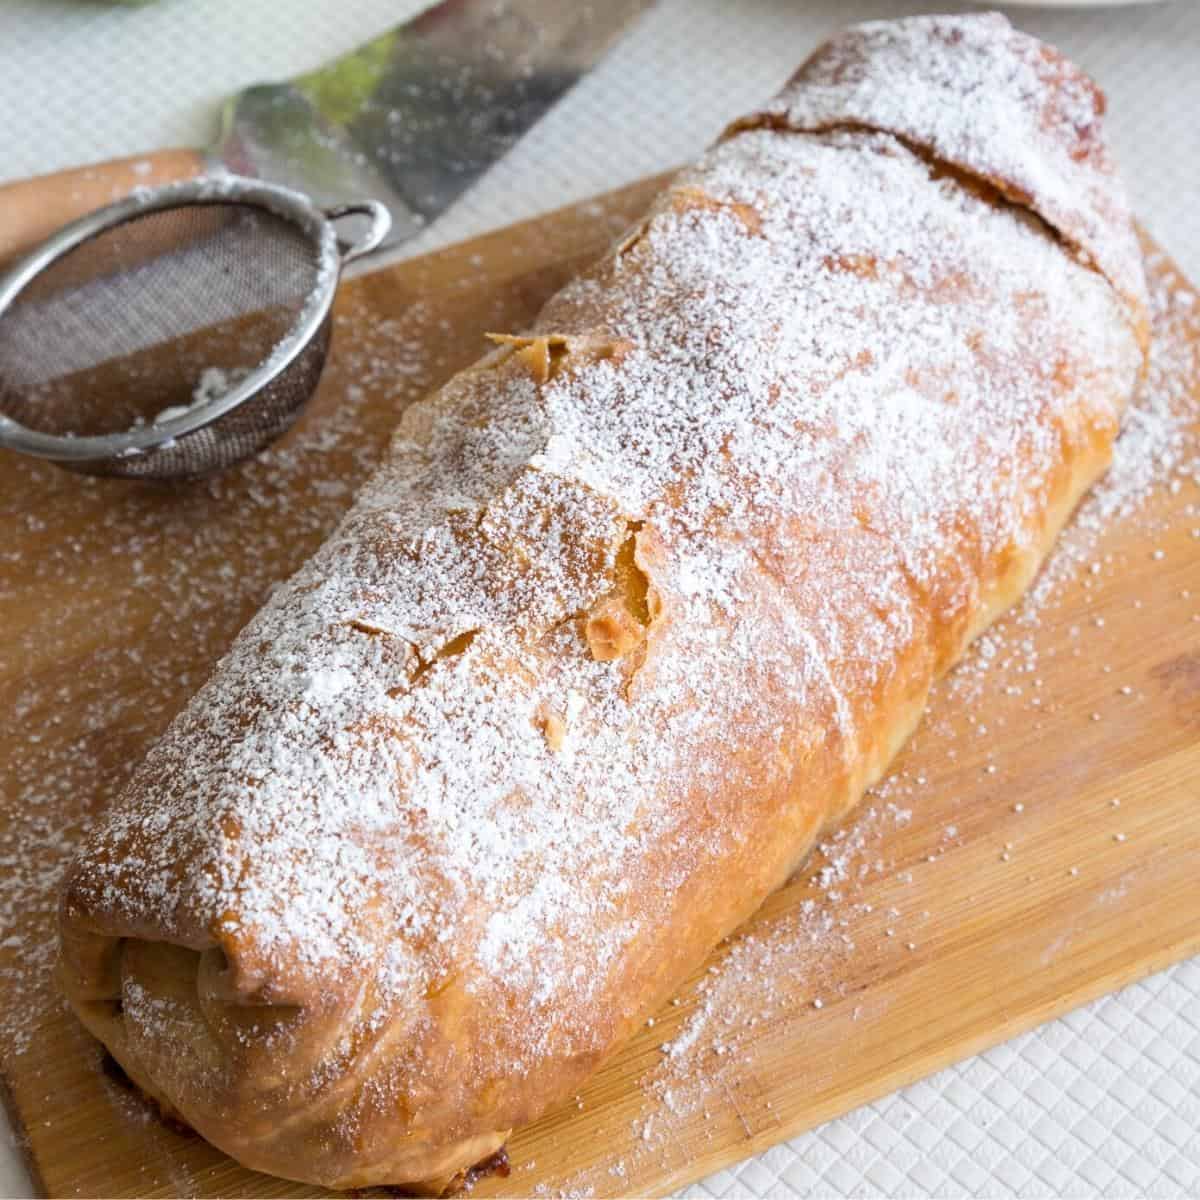 A baked apple strudel on the table.